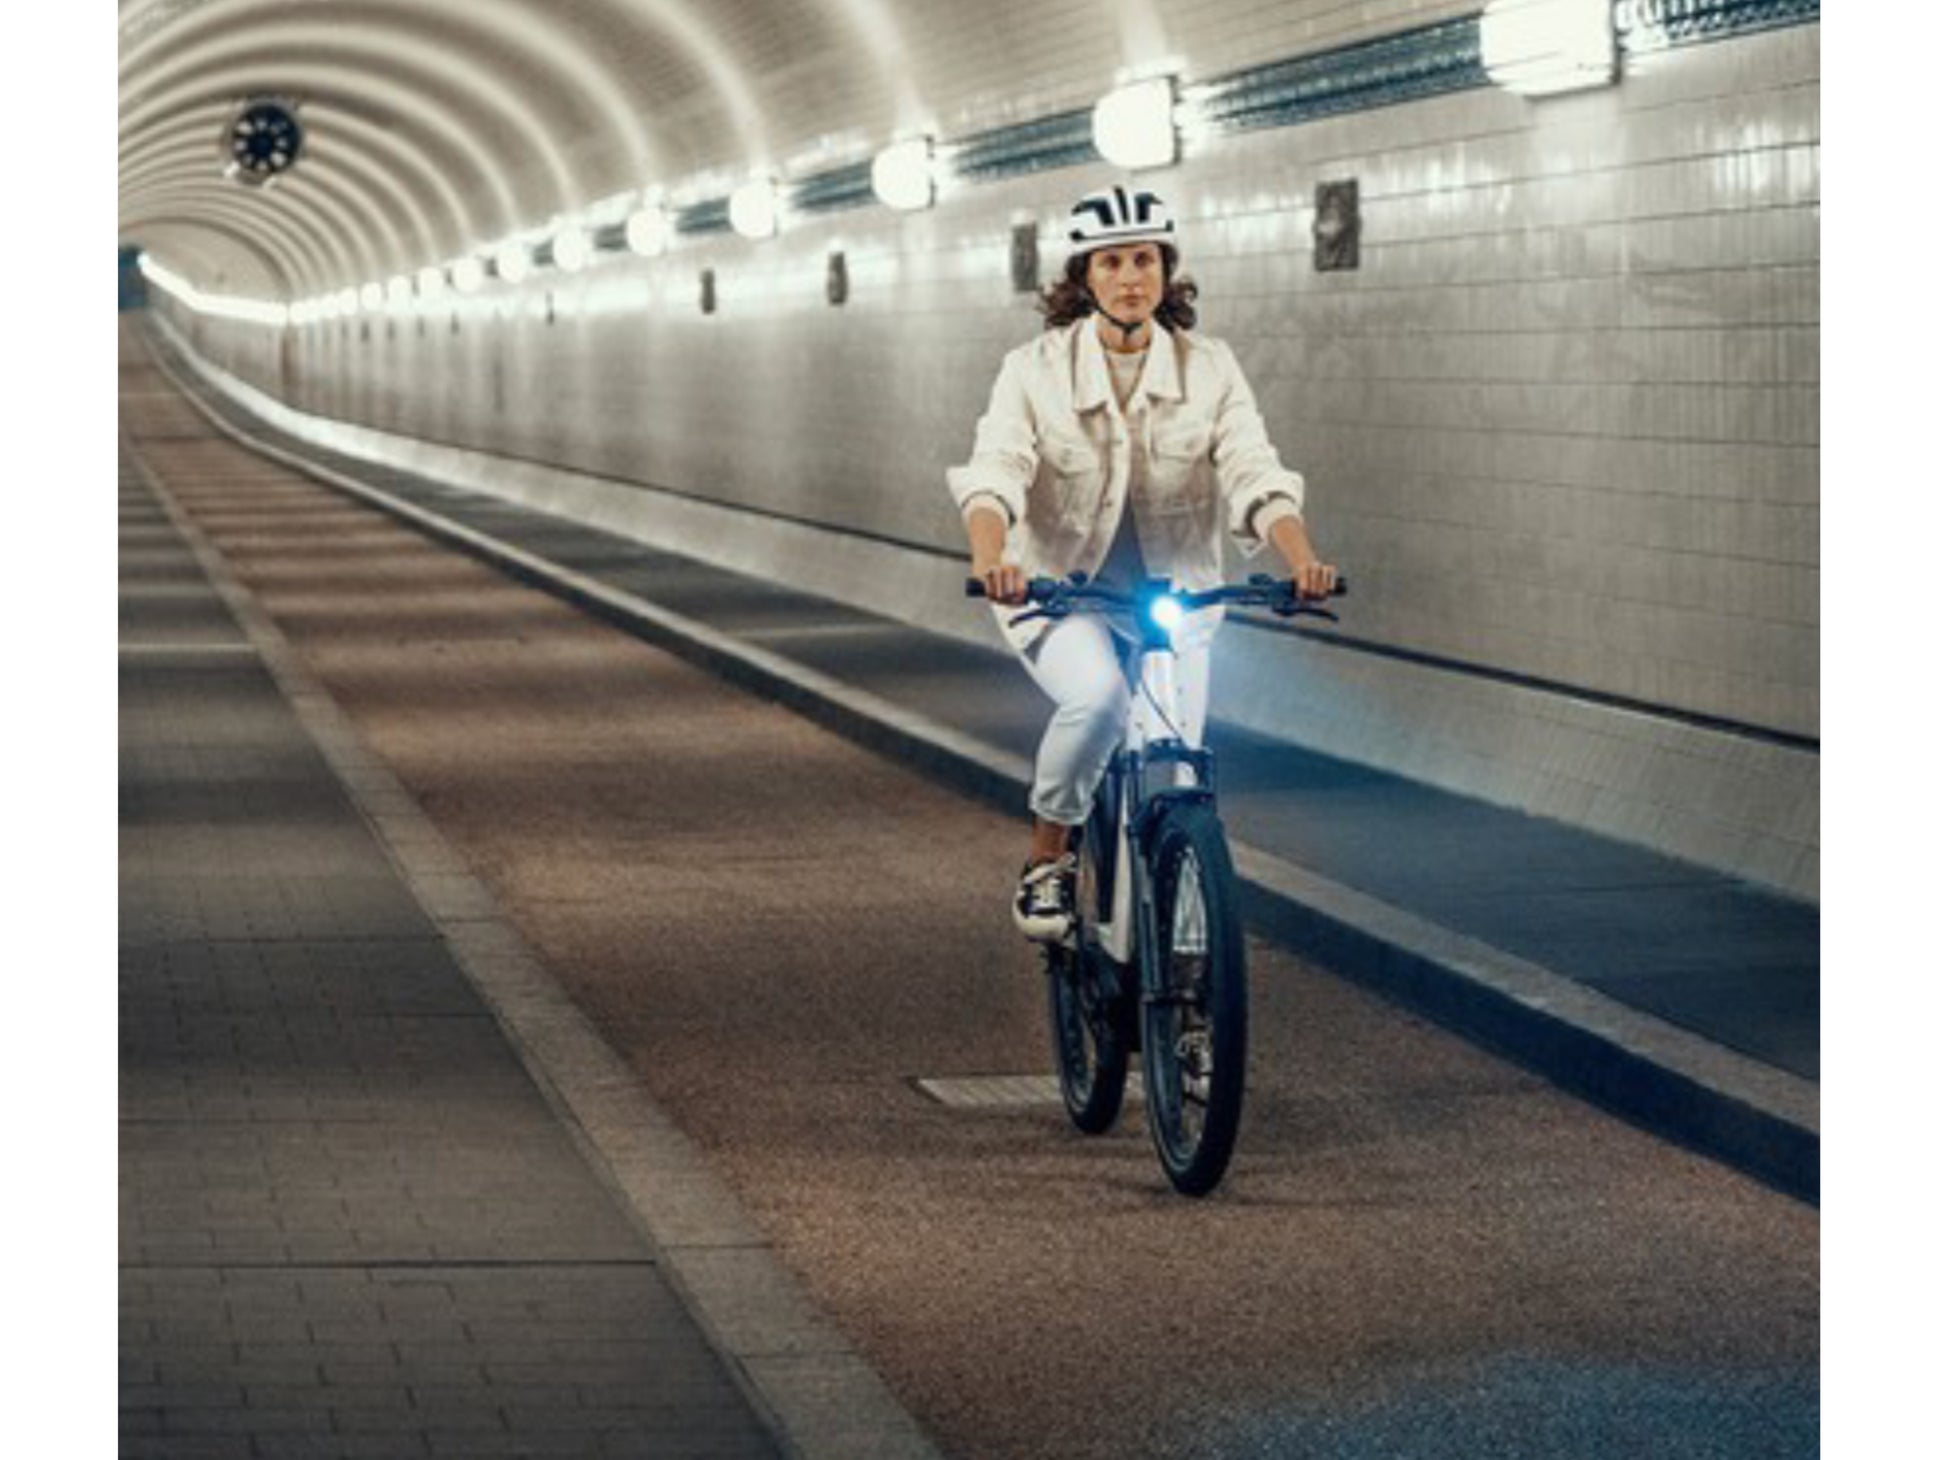 Riese and Muller Nevo GT Vario emtb hardtail woman riding on city tunnel bike path headlight on